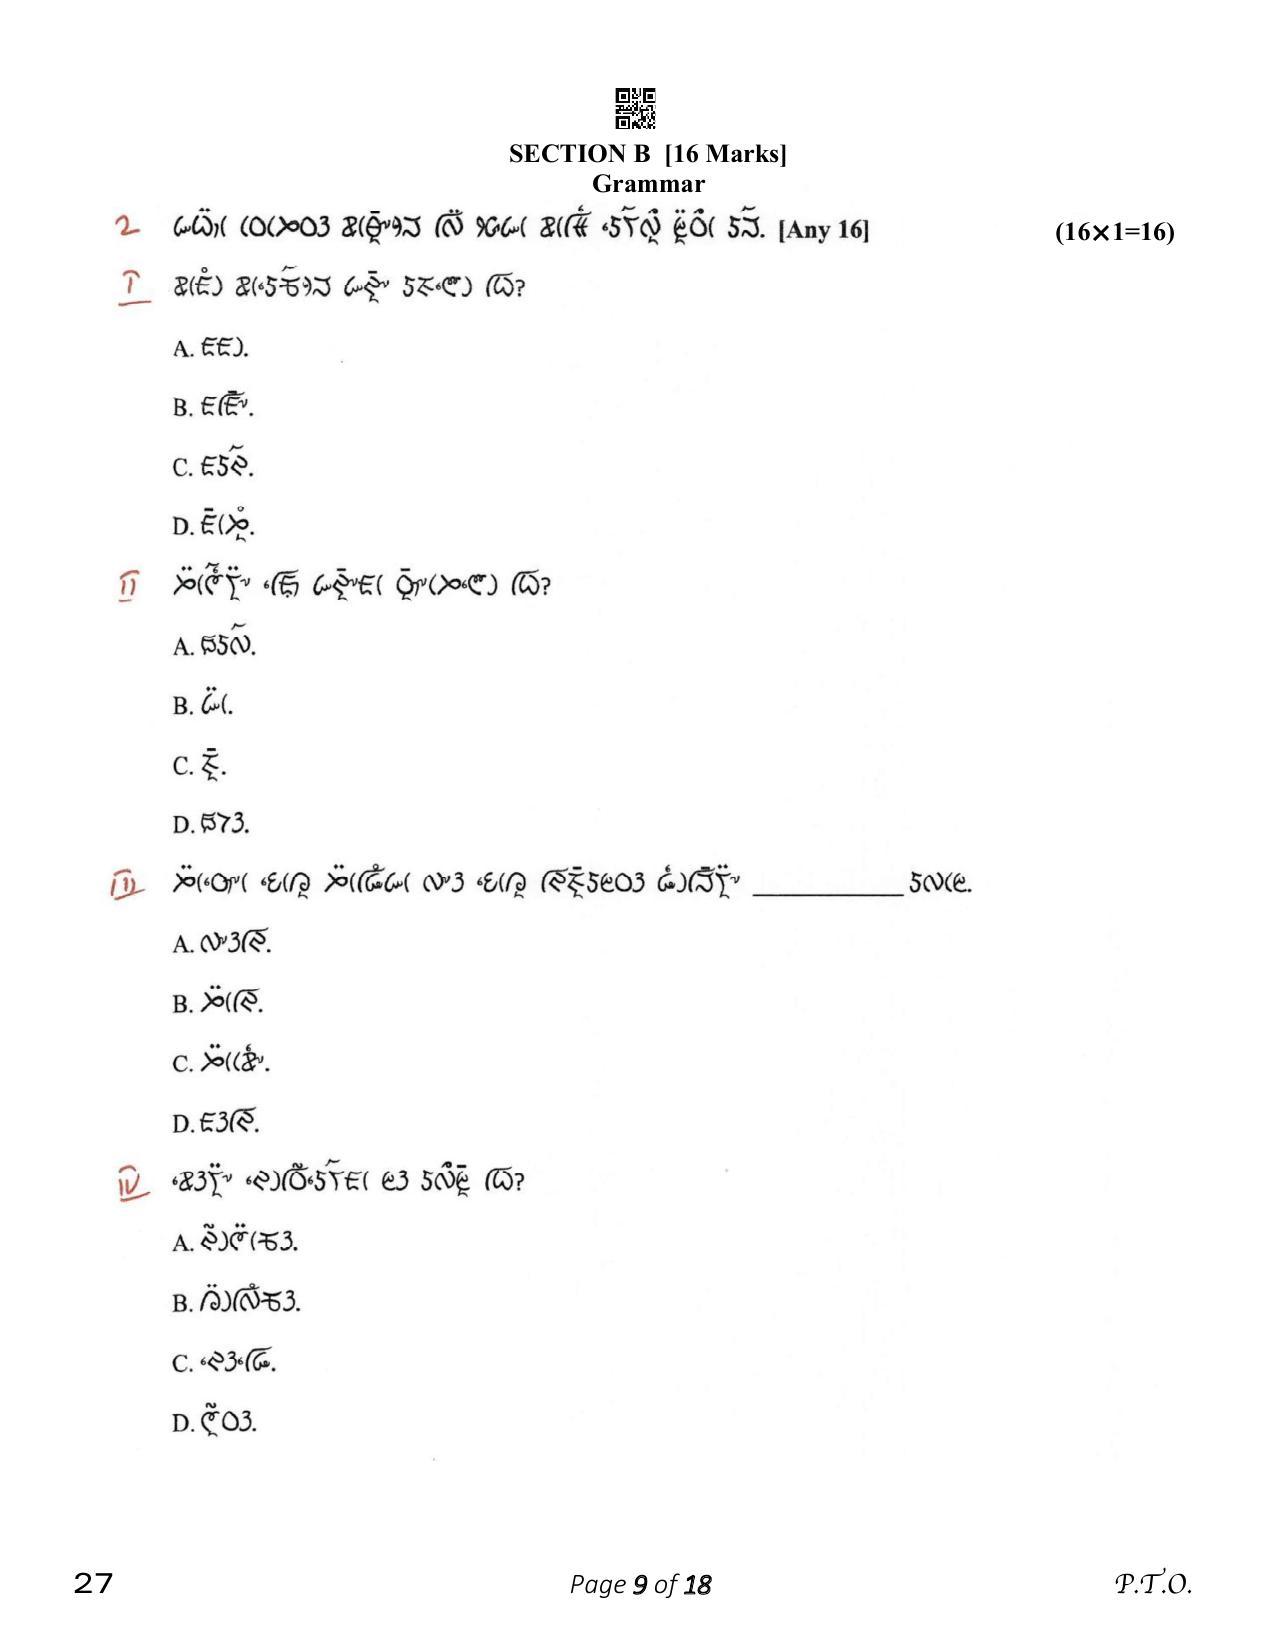 CBSE Class 10 27_Lepcha 2023 Question Paper - Page 9